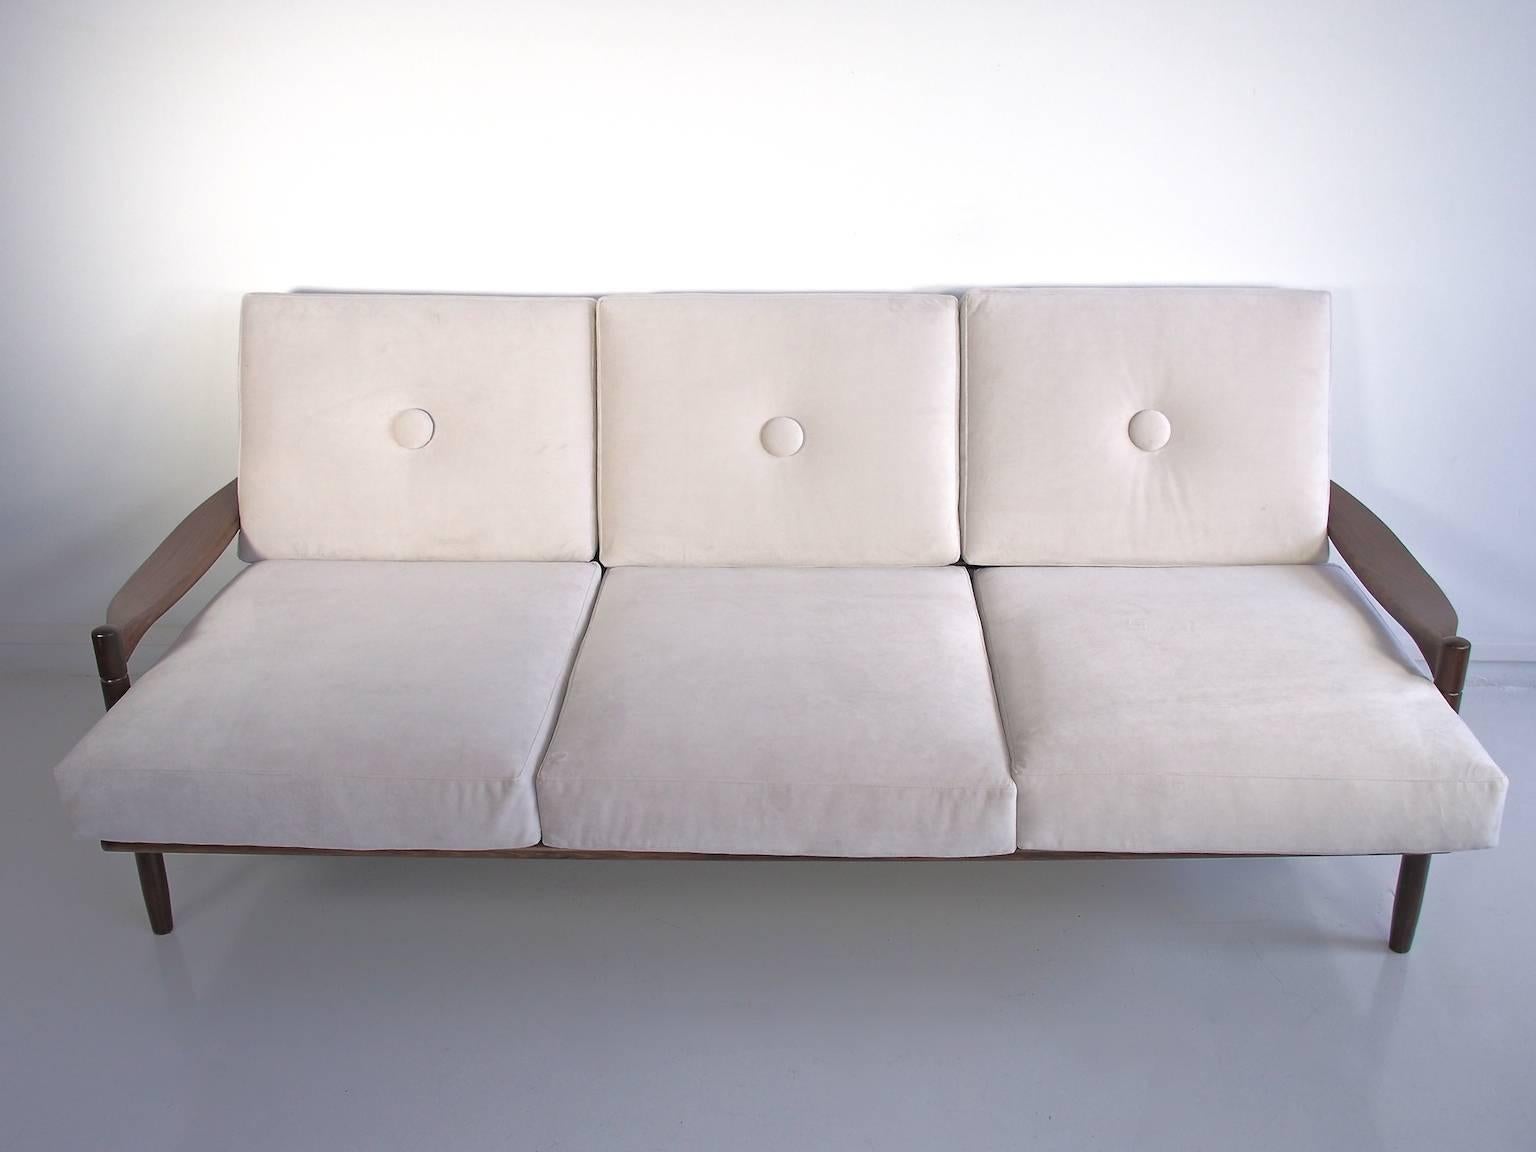 Fabric Scandinavian Modern Style Three-Seat White Sofa with Wooden Frame